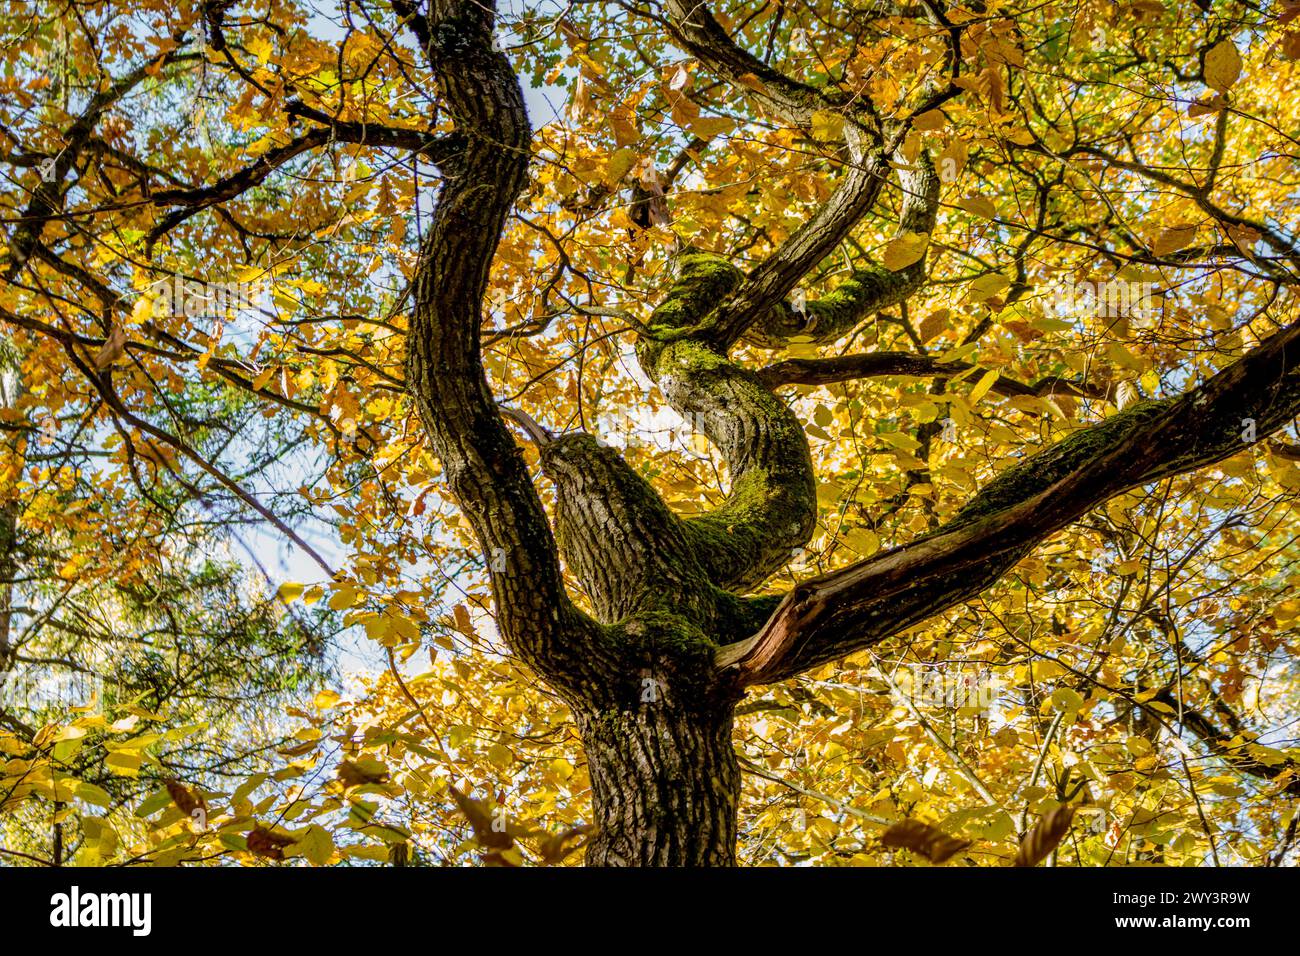 Sinuous oak trunk with yellow foliage in autumn Stock Photo